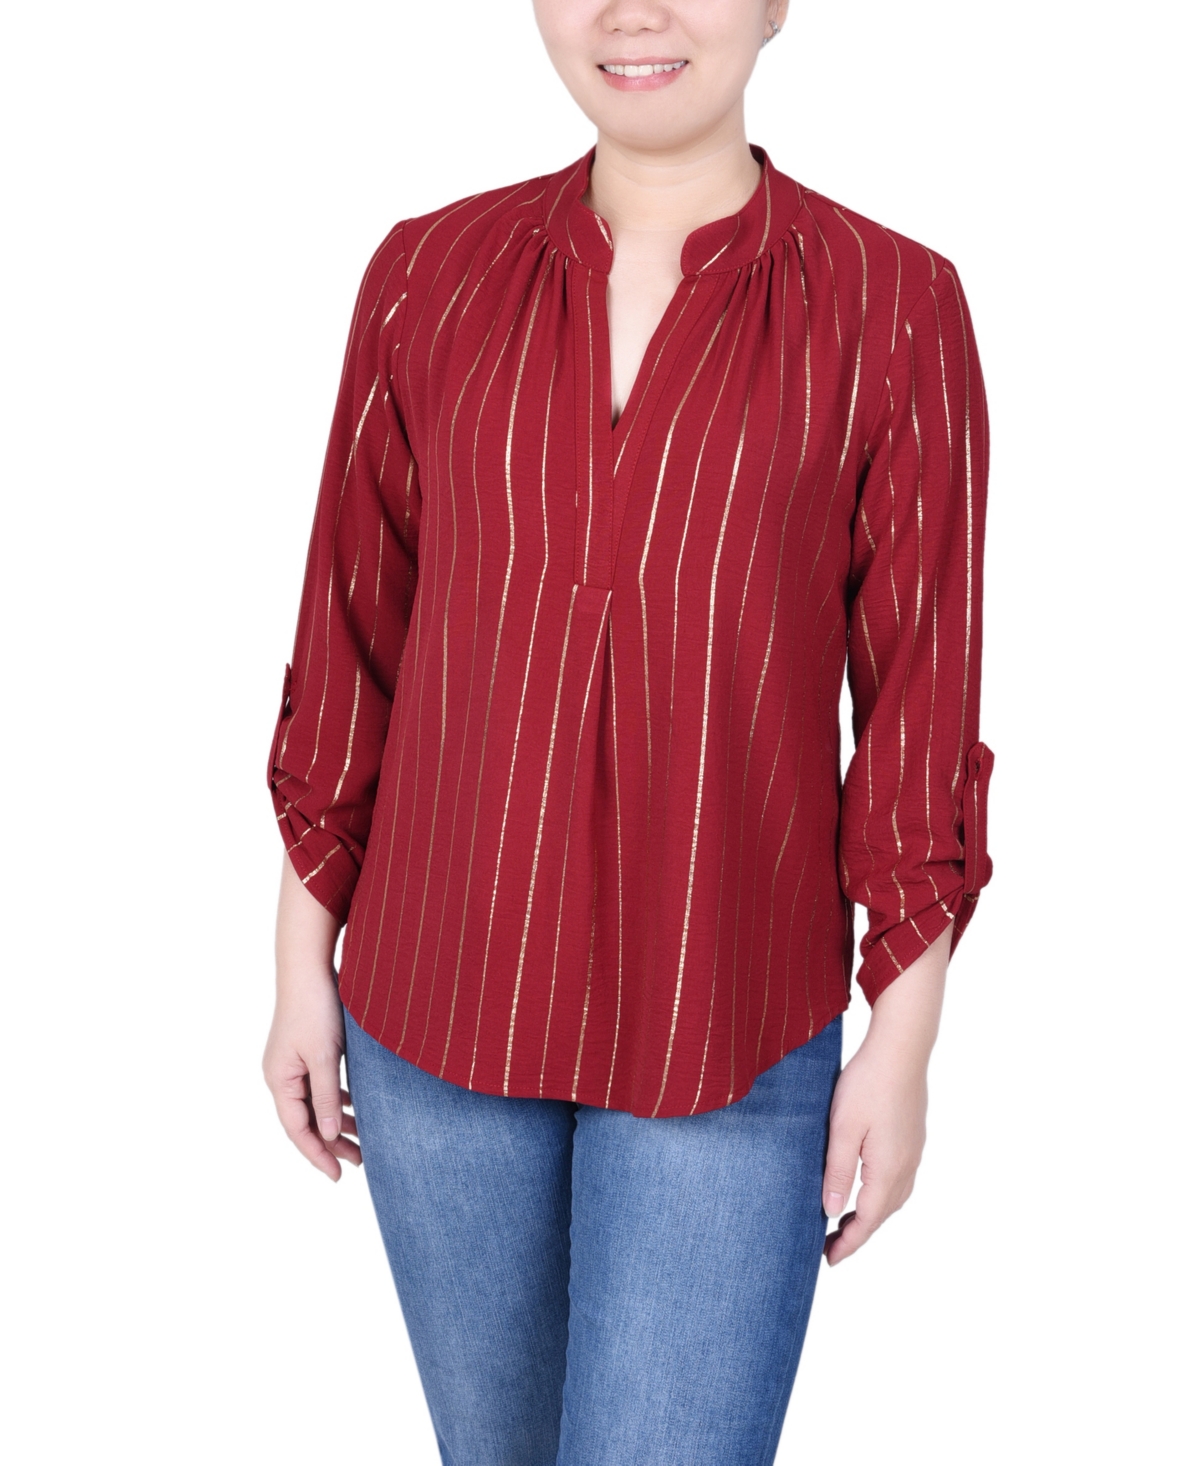 NY COLLECTION PETITE LONG SLEEVE FOIL STRIPED BLOUSE